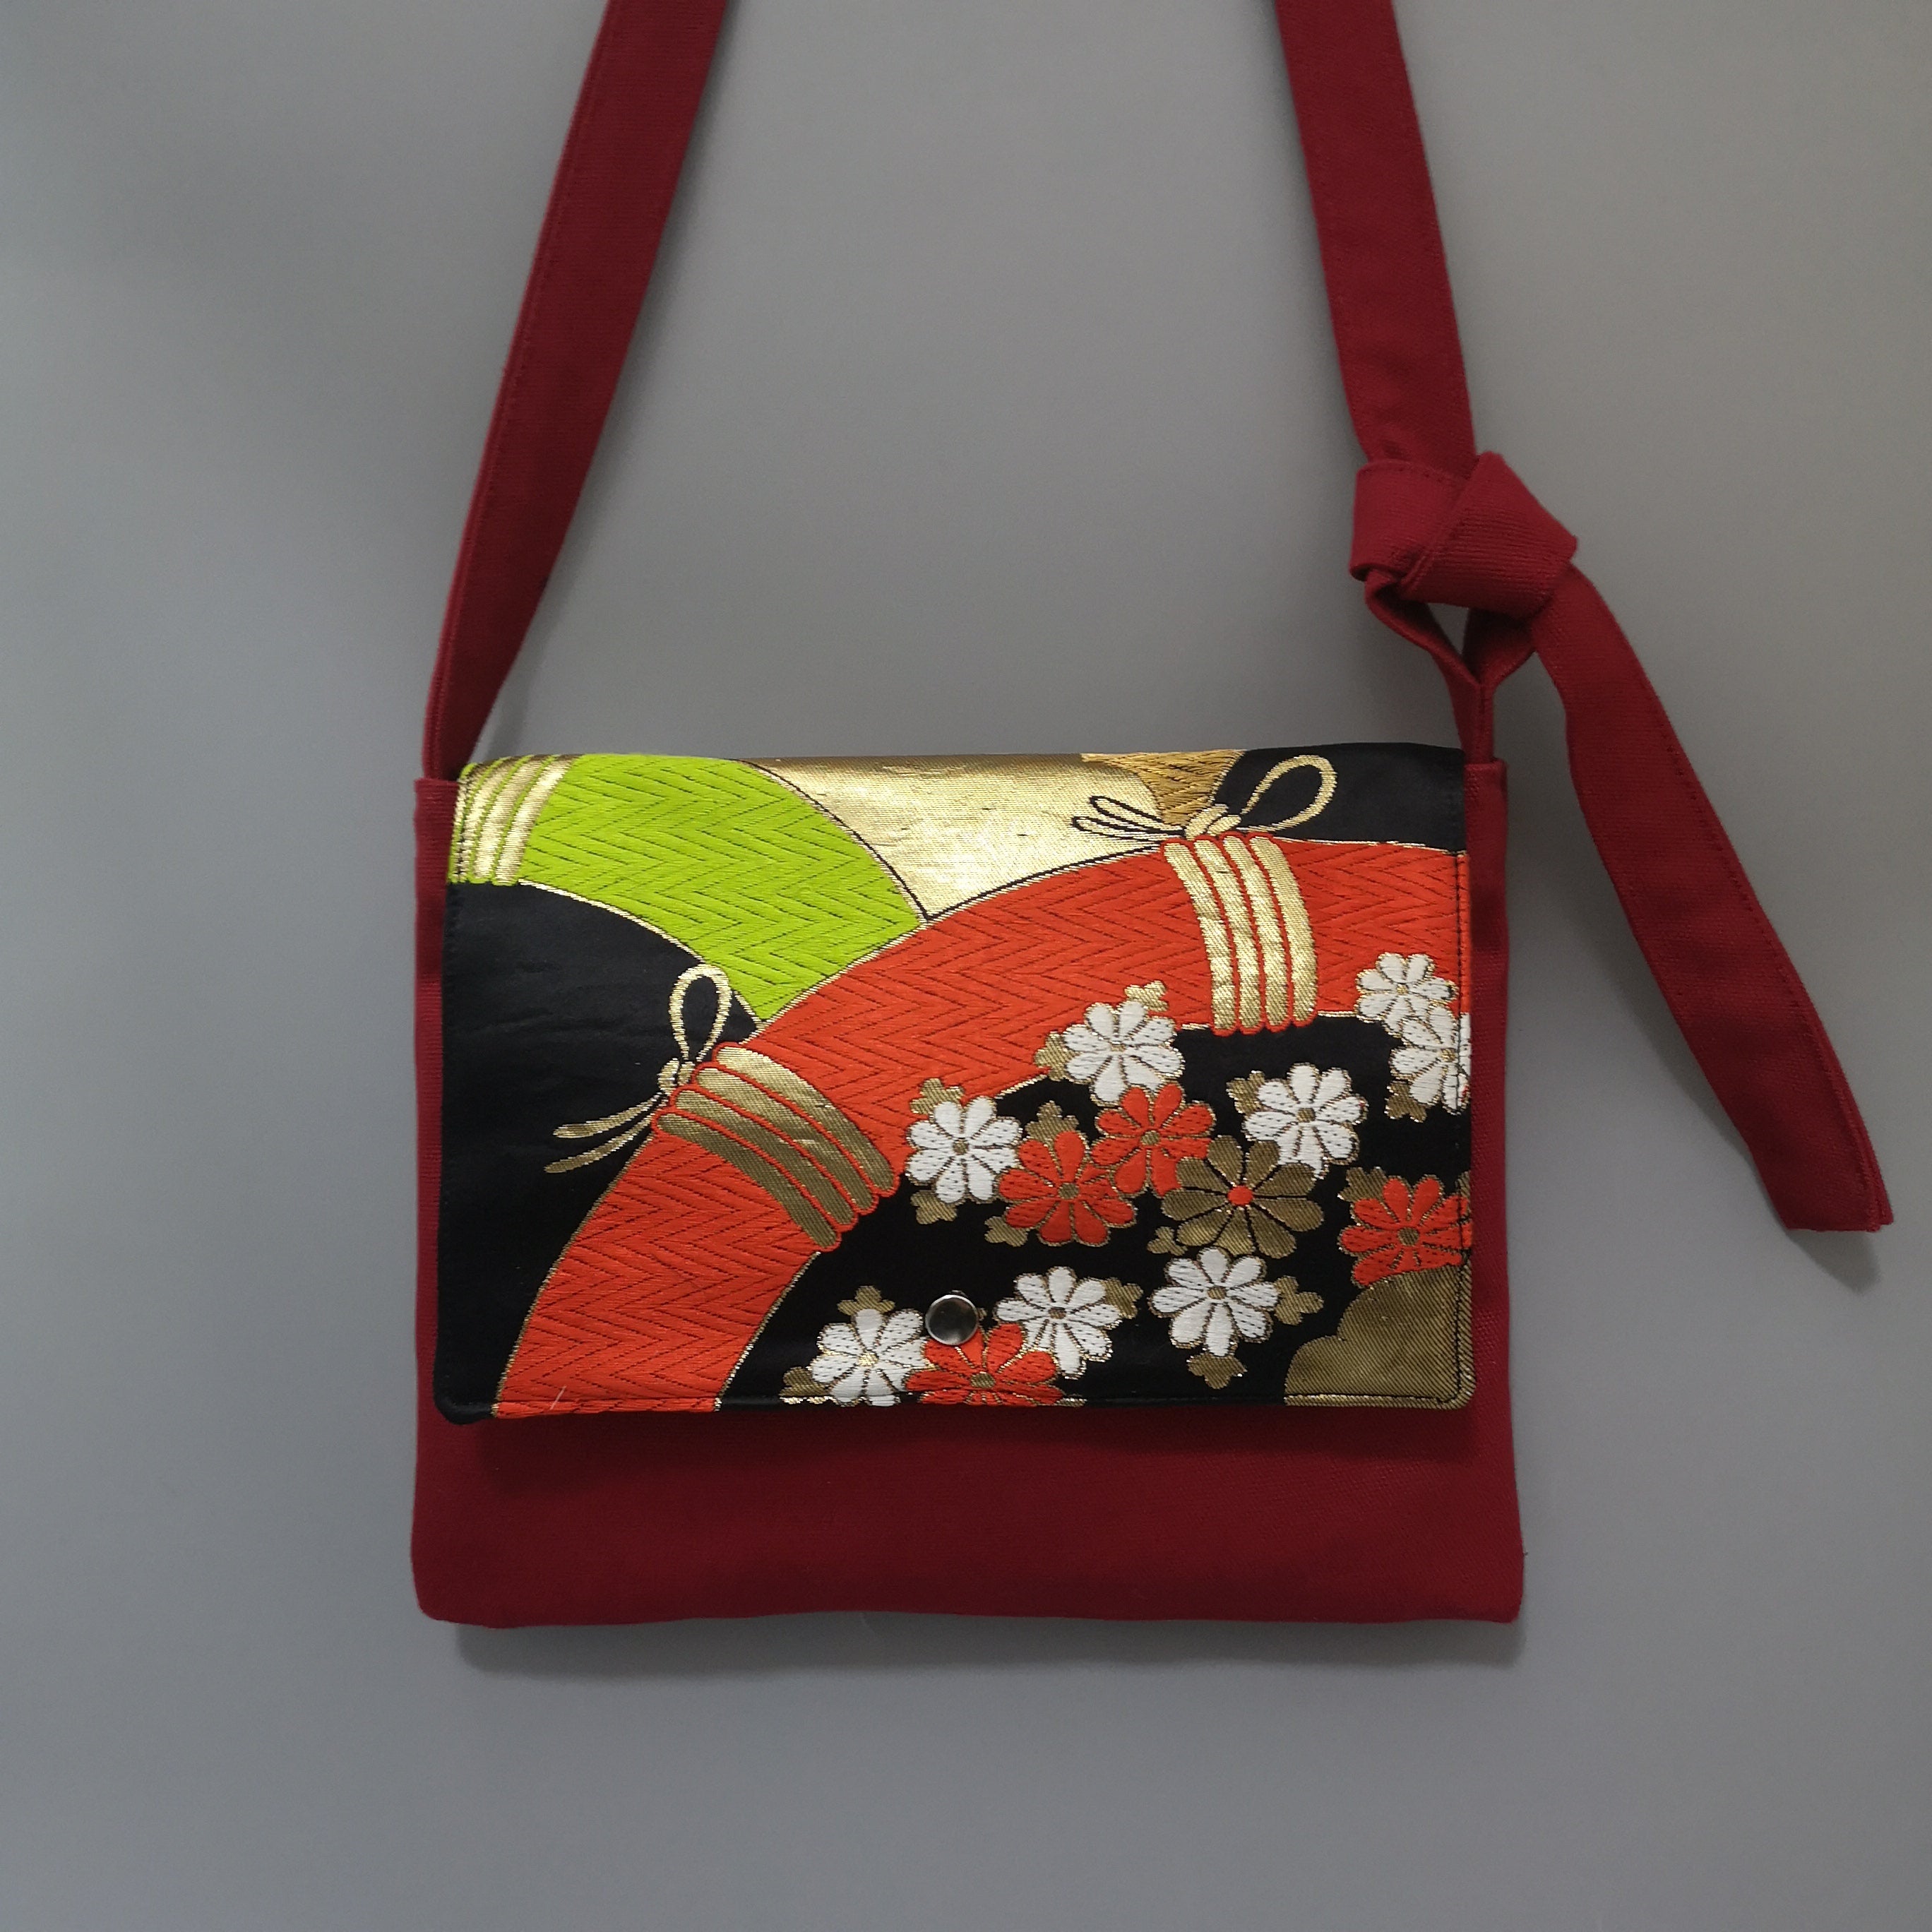 *OC Obi Handknotted Canvas Bags- 1405